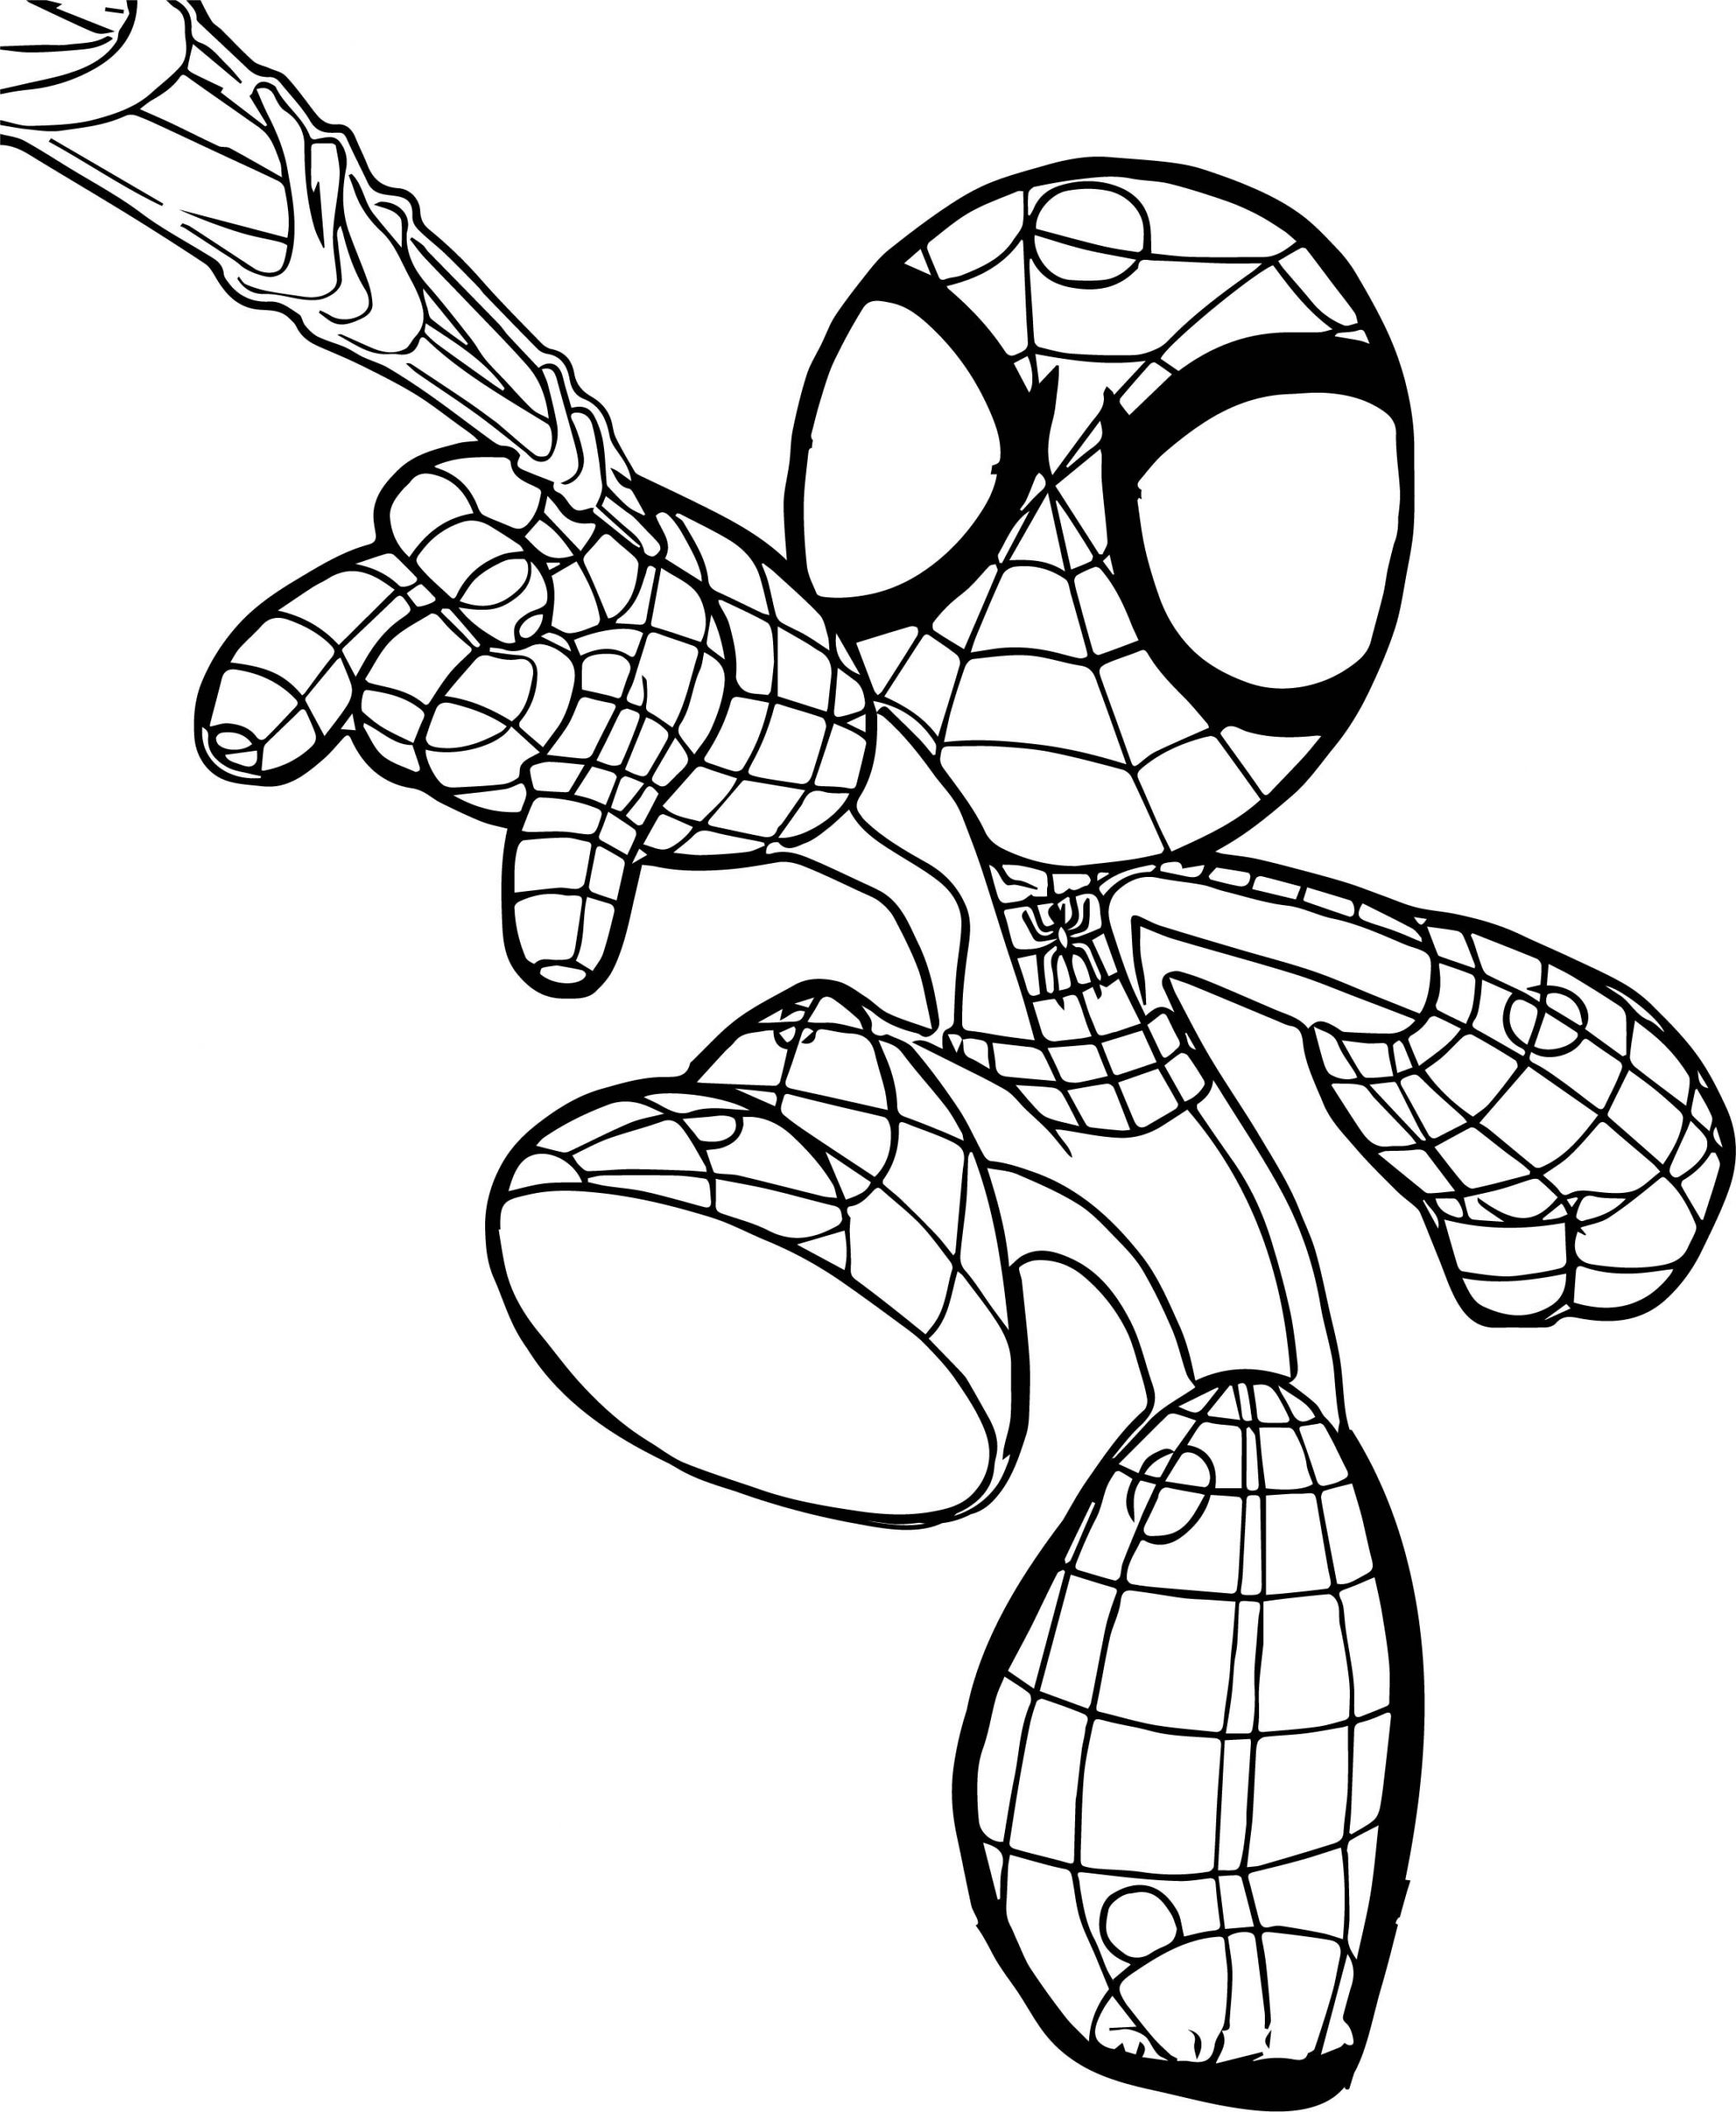 Spiderman Coloring Pages For Kids
 Kids Spider Man Coloring Page